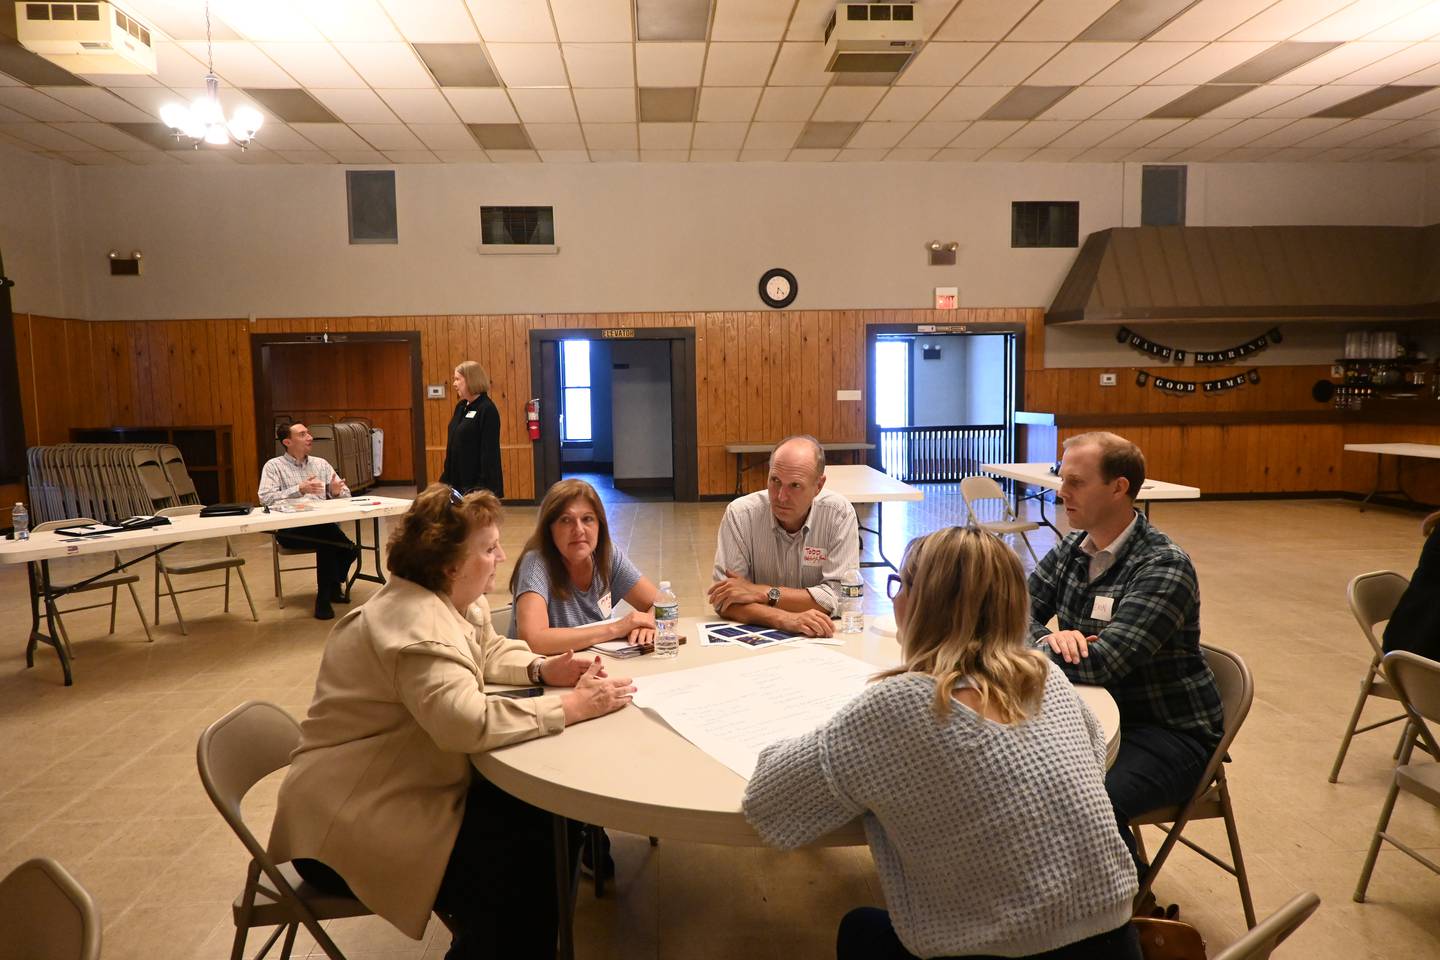 Community & Economic Development Specialist, Pam Schallhorn split the approximate 20 attendees into groups and then worked together to “identify existing resources or assets that currently impact the quality of life in La Salle.”